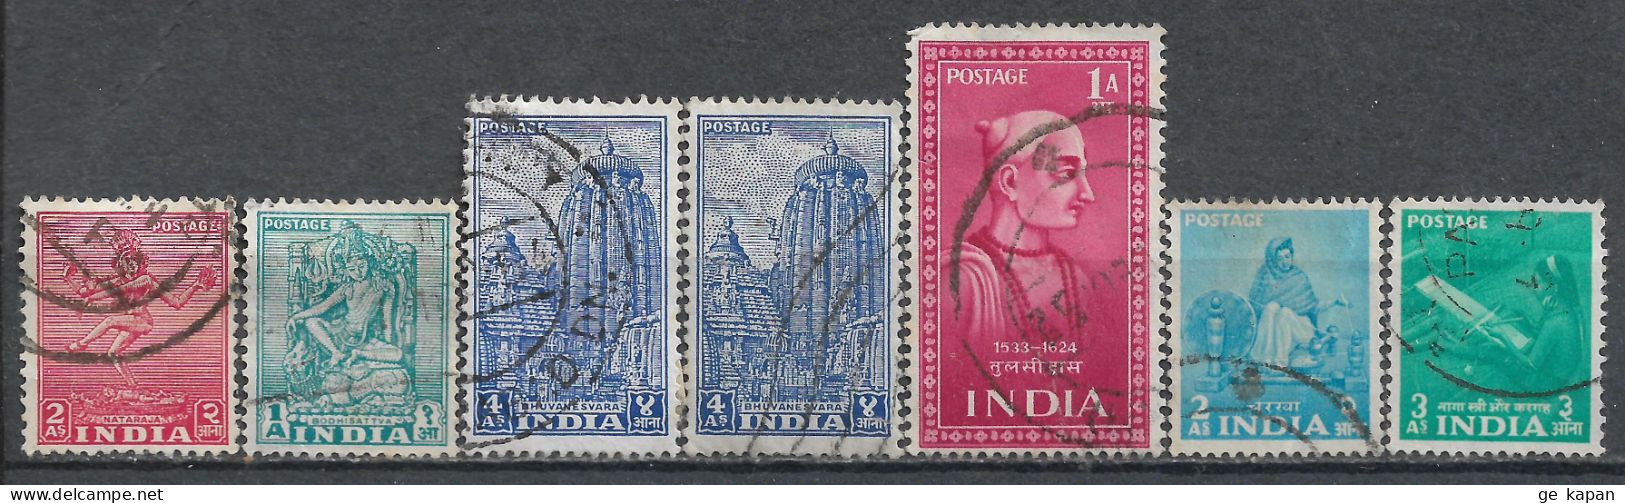 1949-1955 INDIA Set Of 7 Used Stamps (Michel # 195,215,217,222,242,243) - Oblitérés